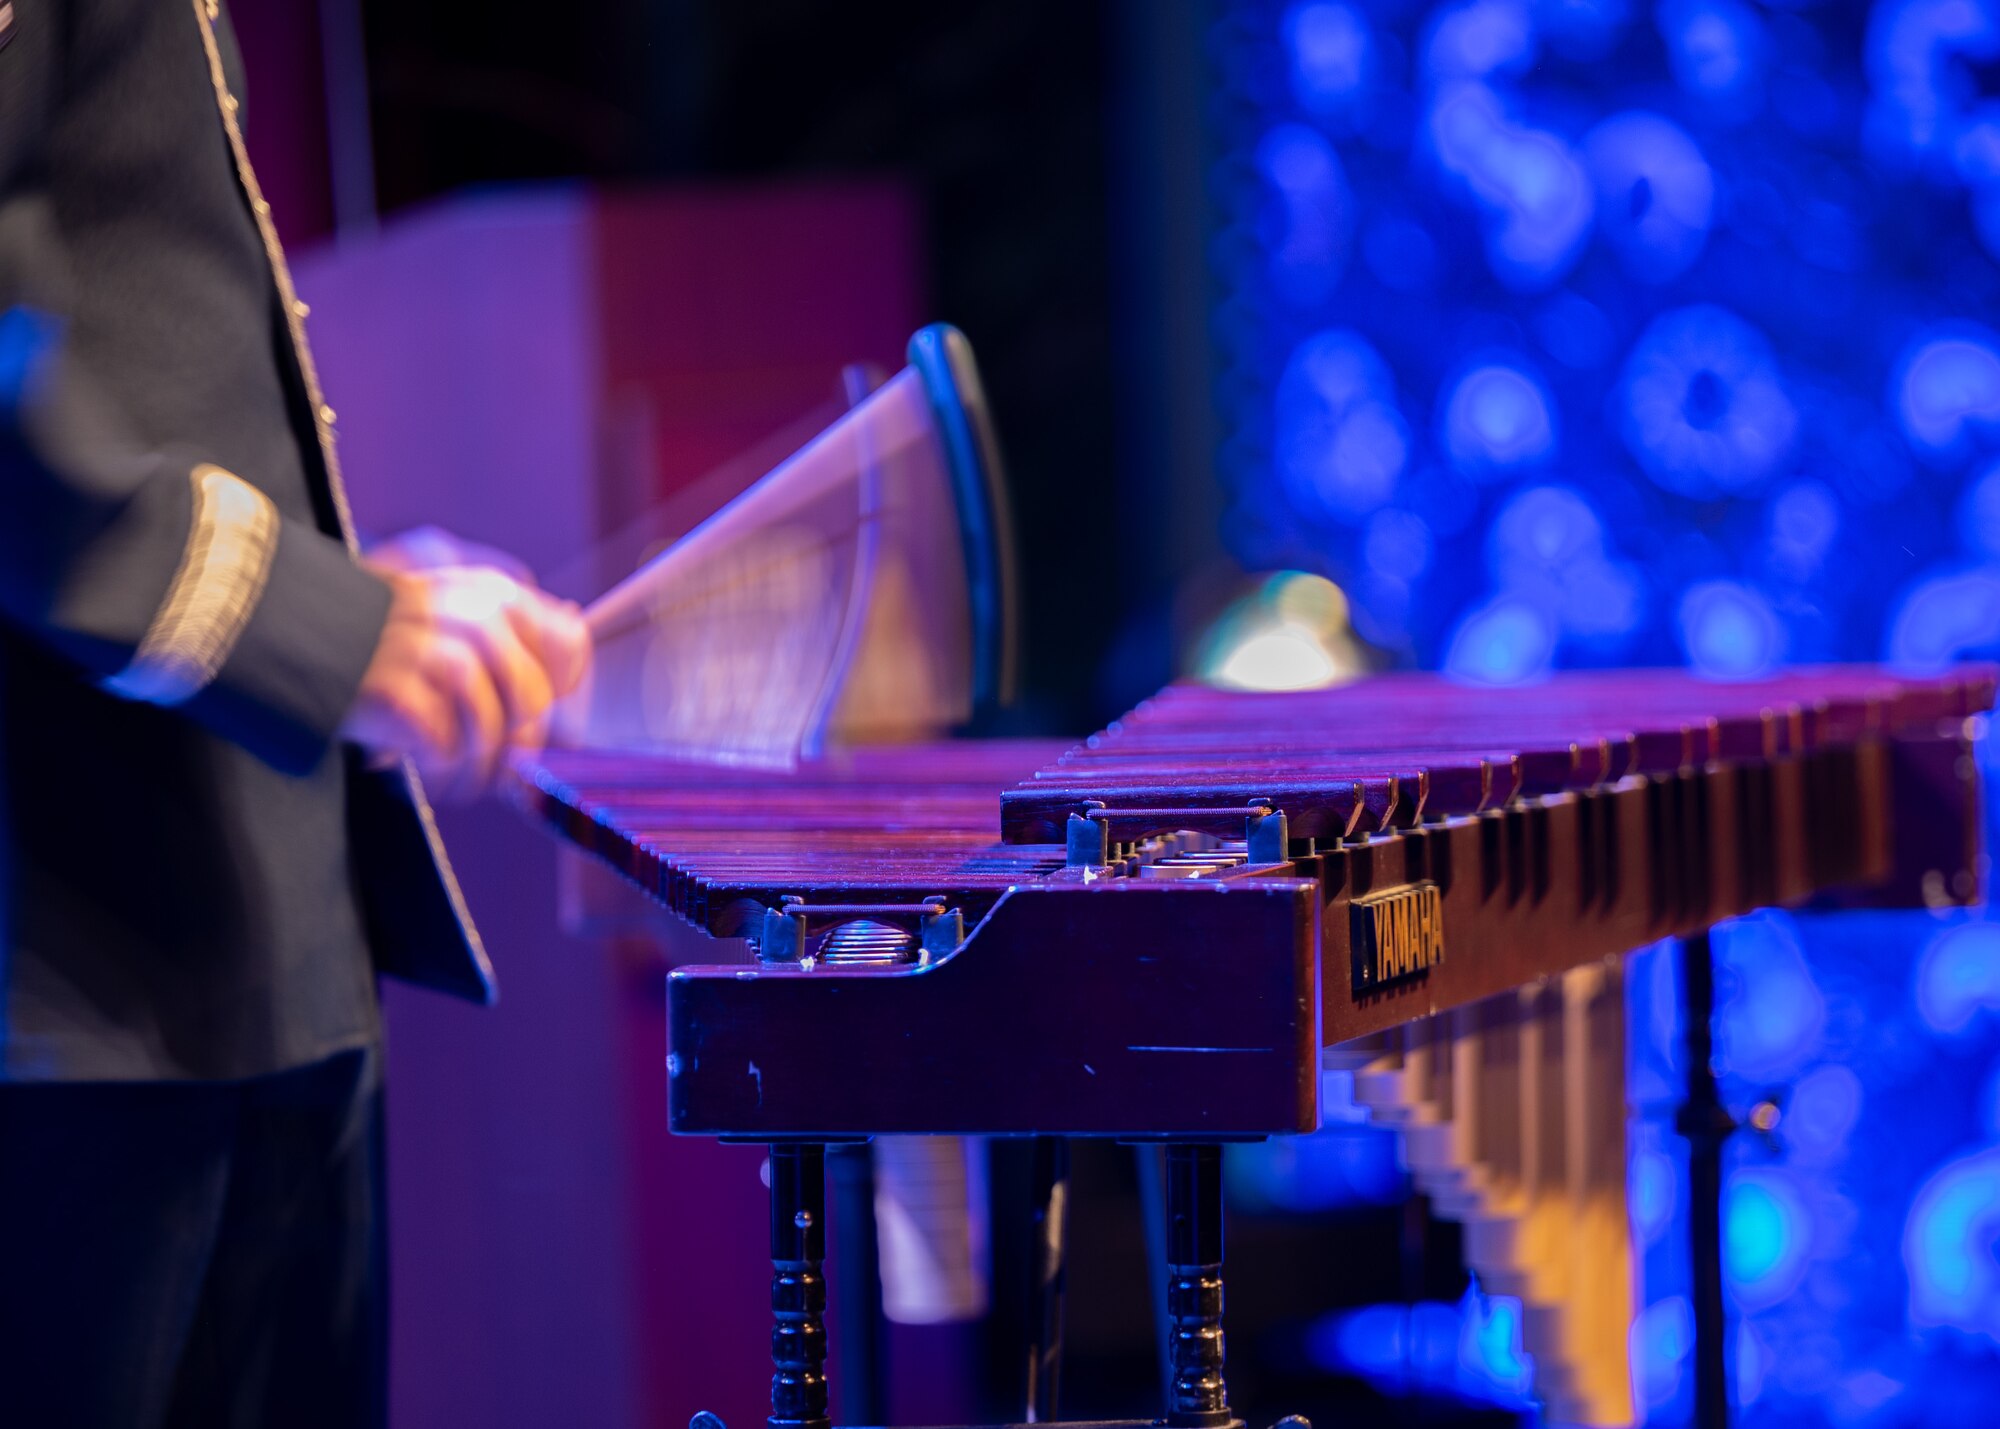 Airman plays xylophone on stage